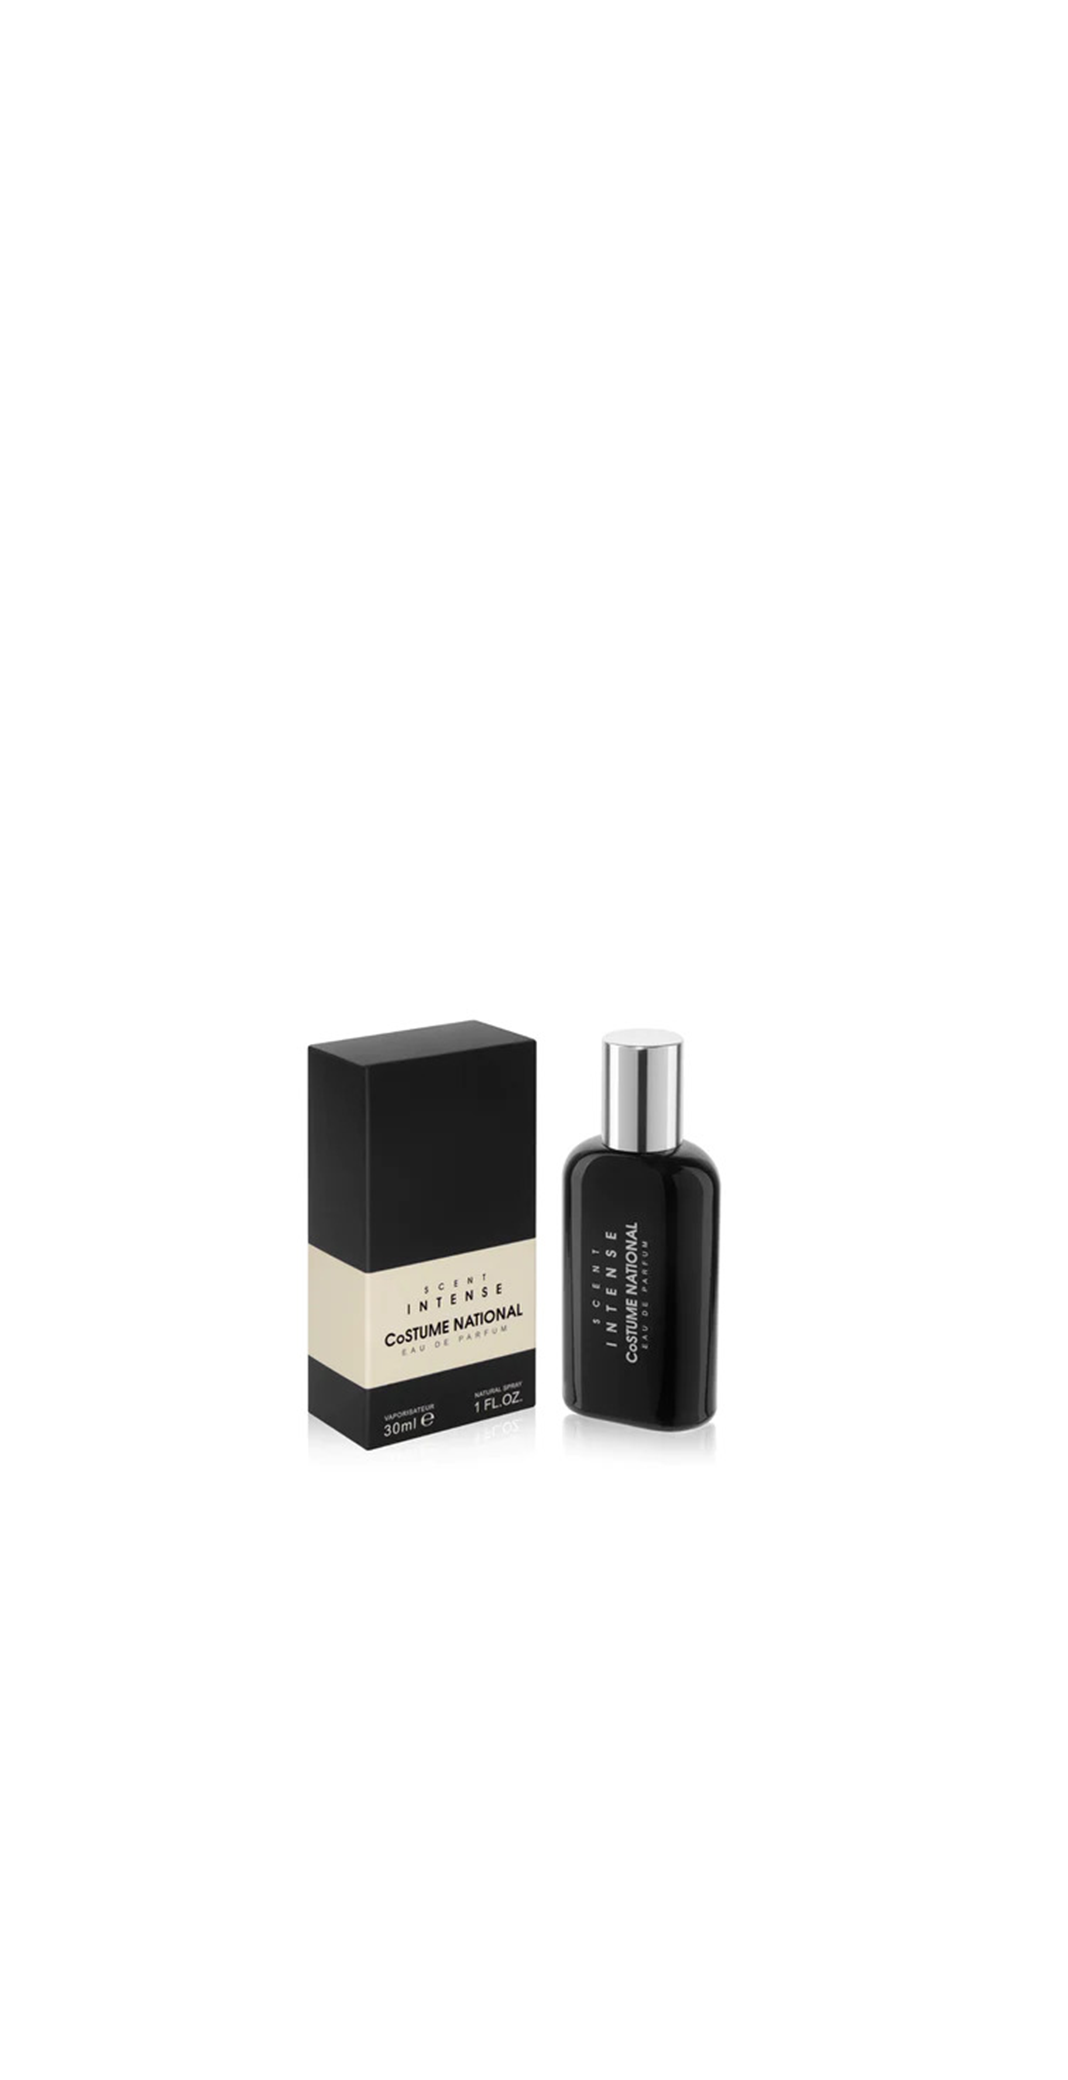 COSTUME NATIONAL Scent Intense